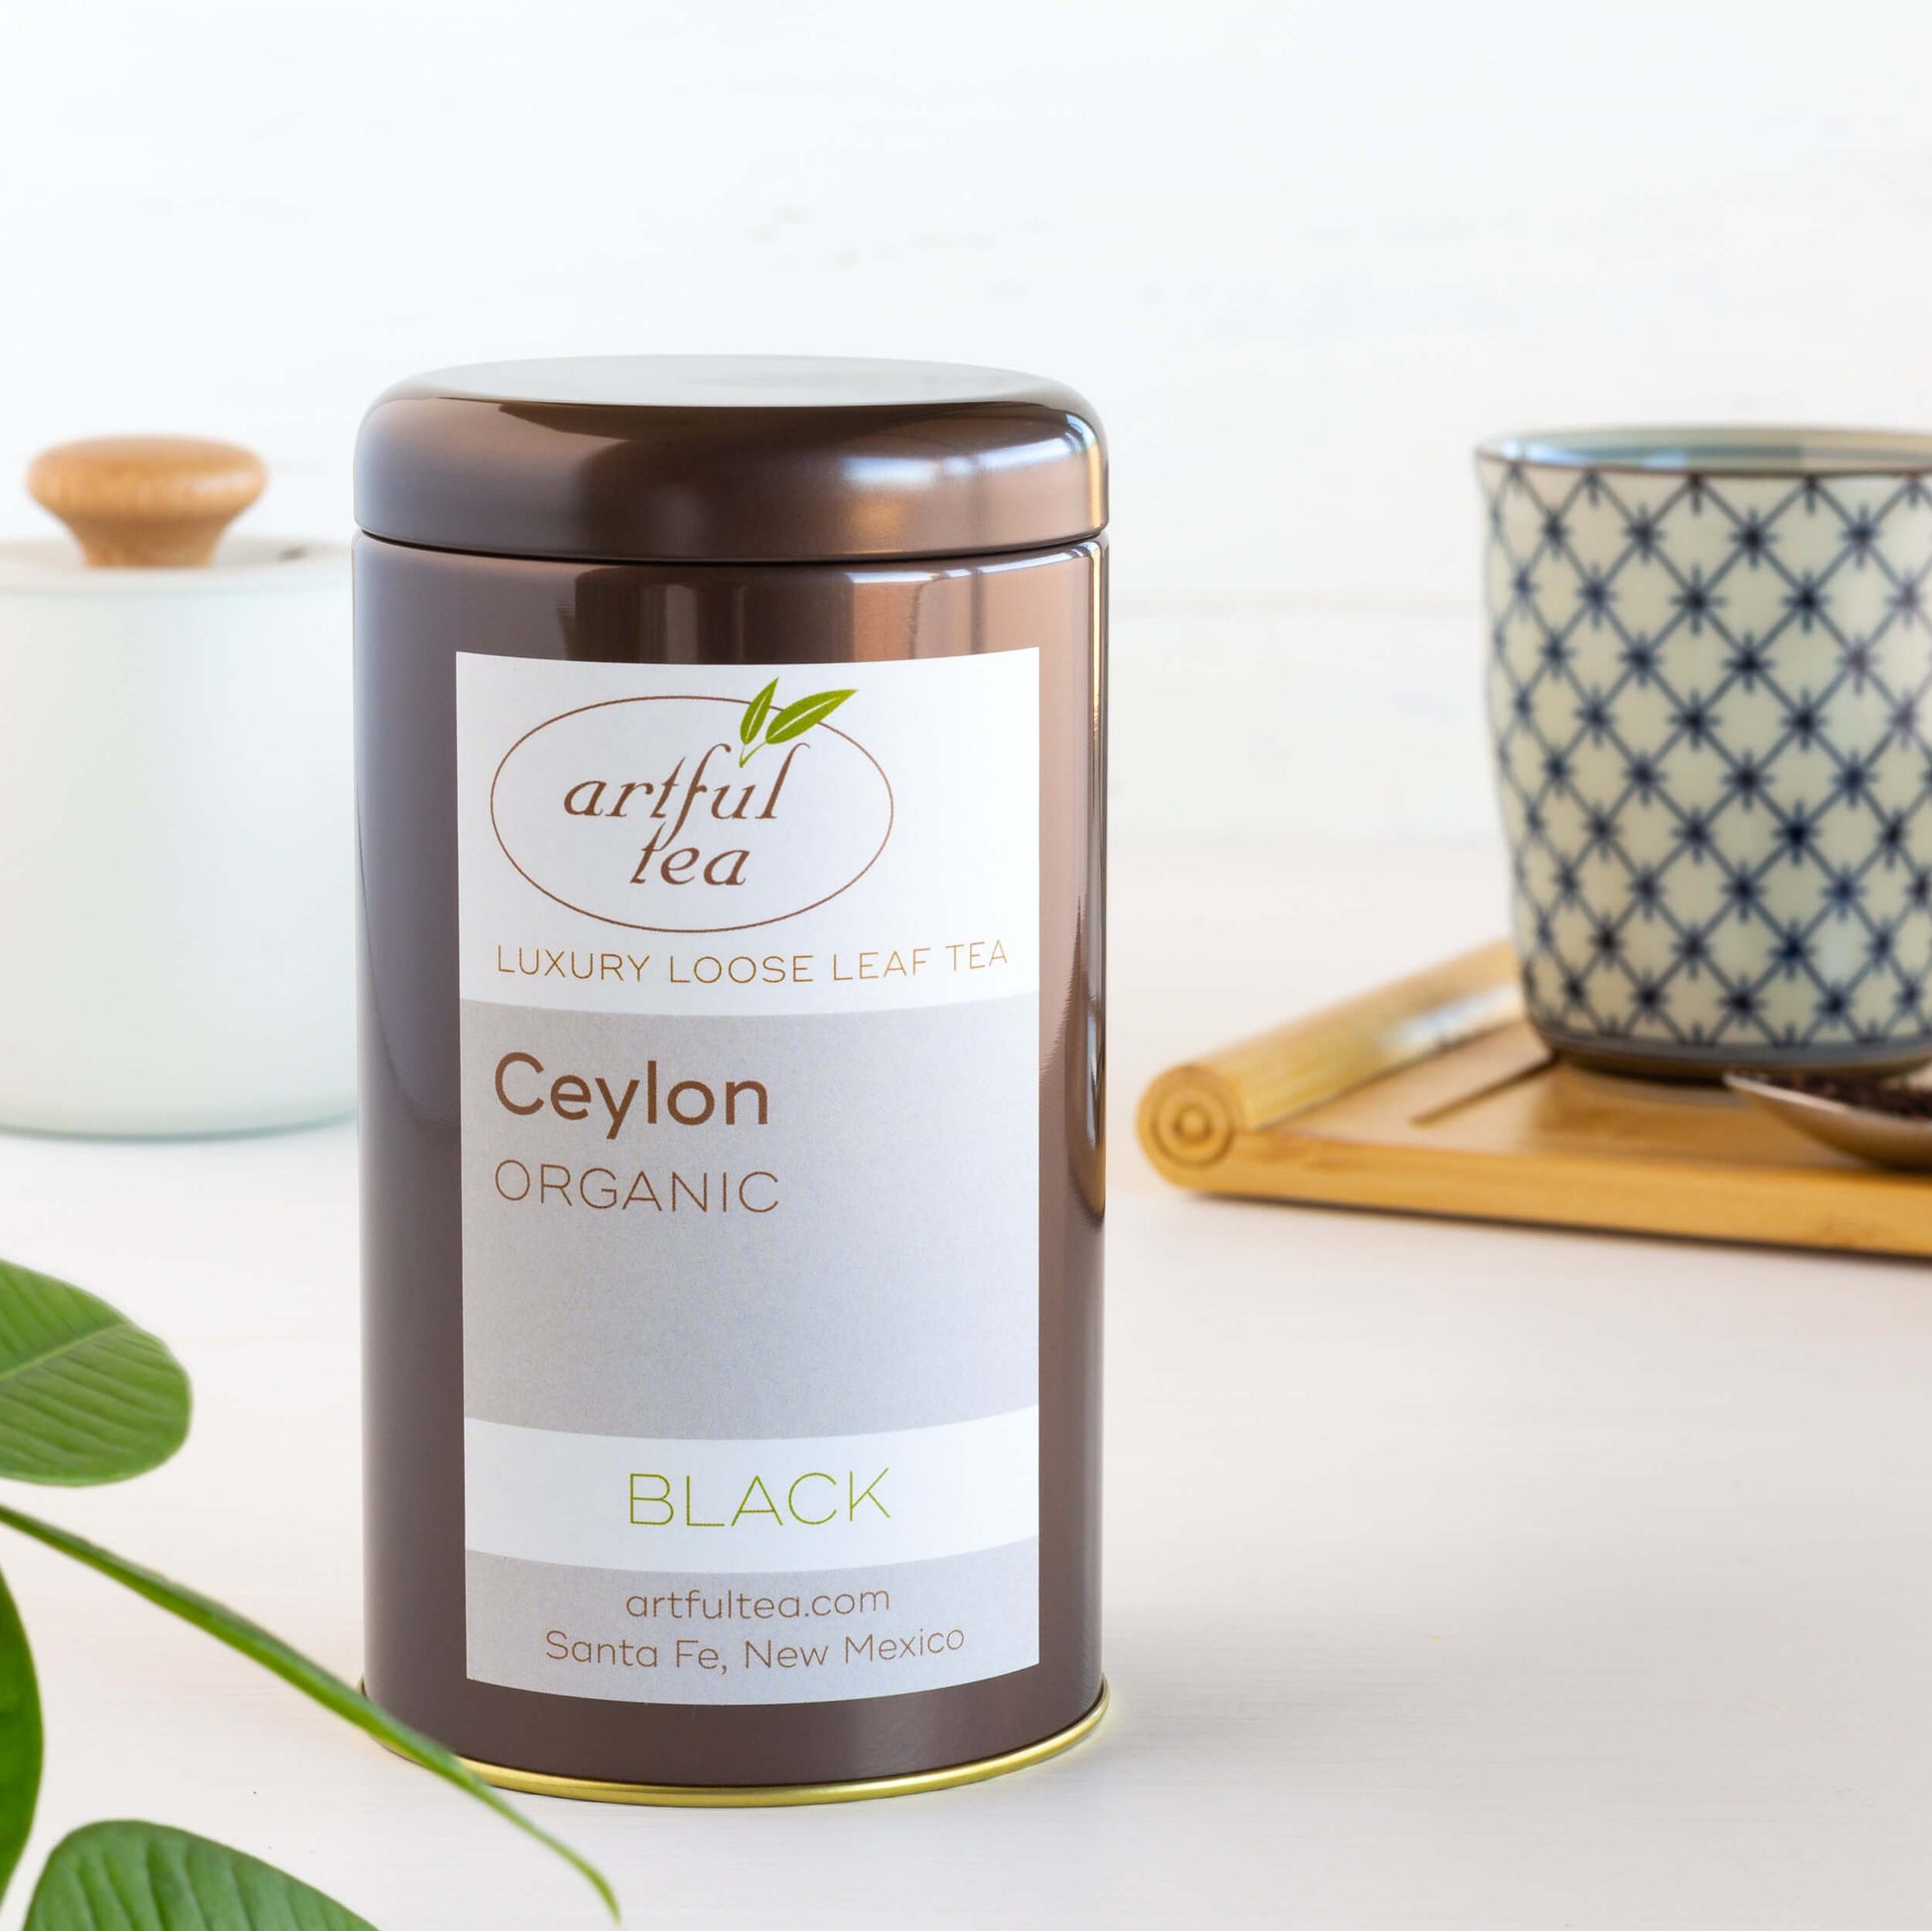 Organic Ceylon Black Tea shown packaged in a brown tin, with mug on tray in background